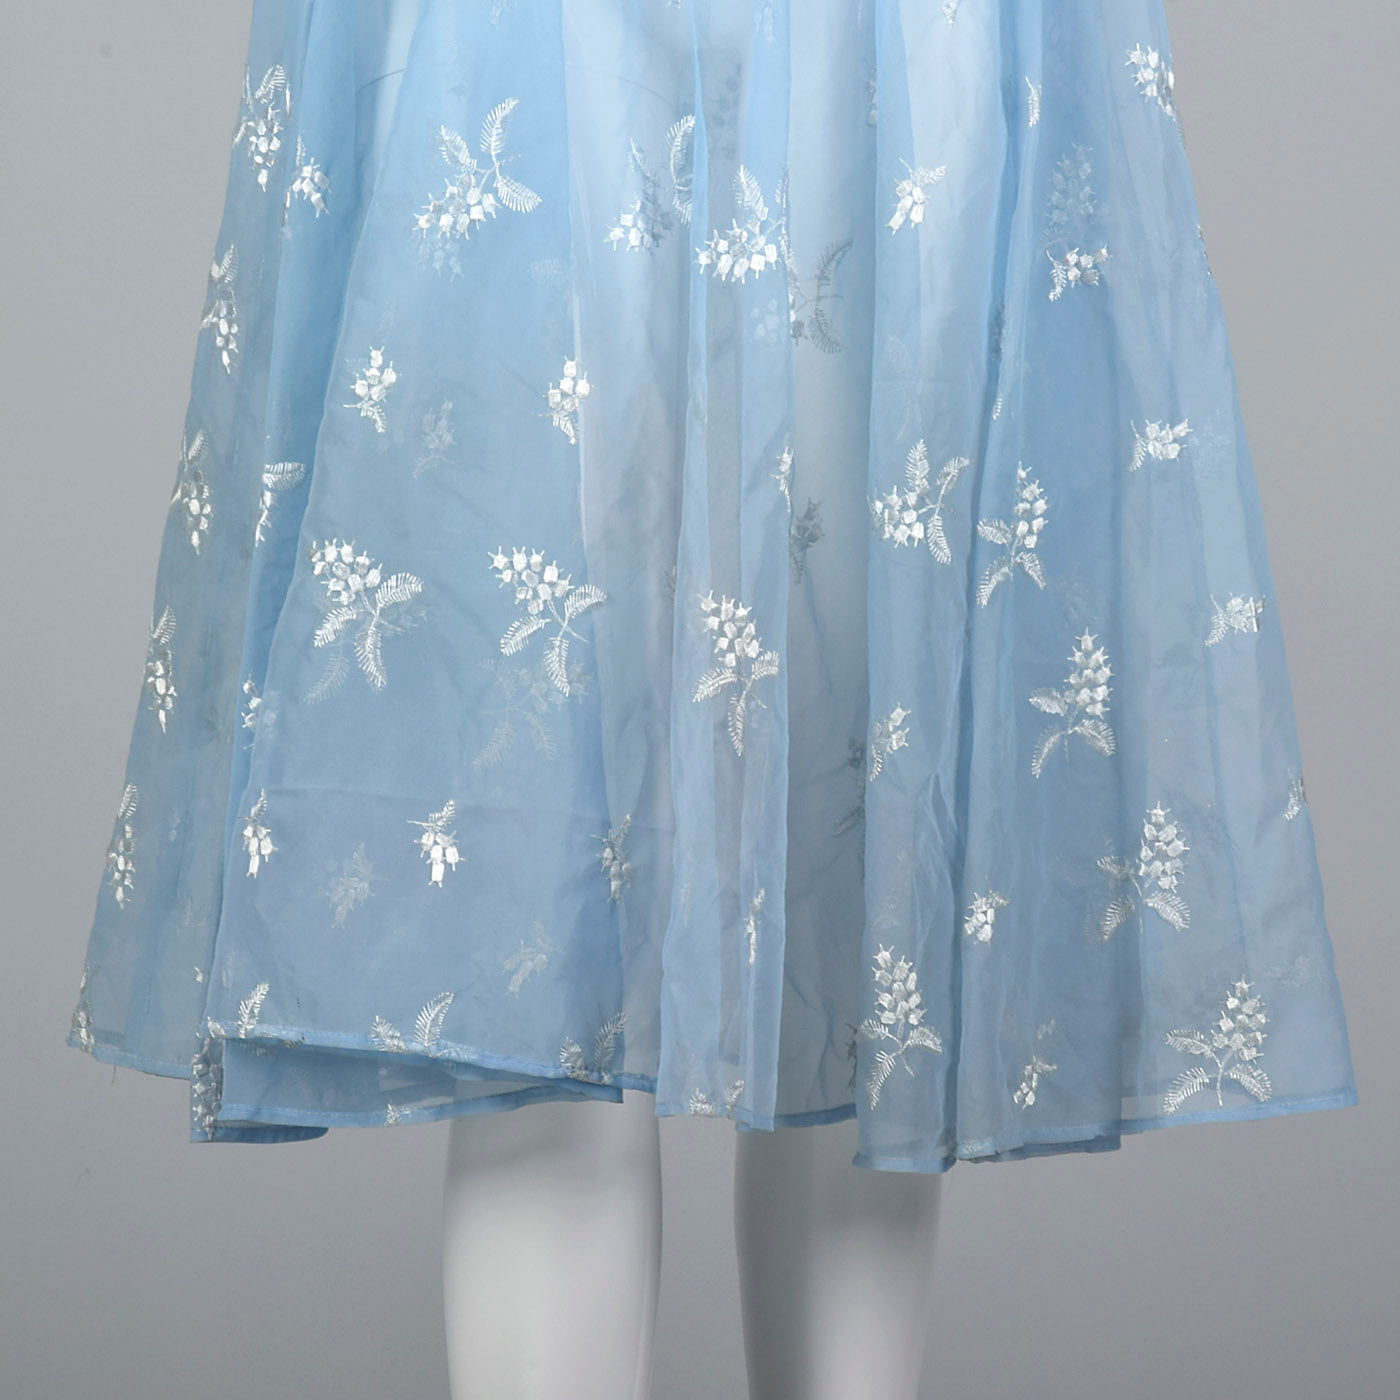 1950s Sheer Blue Fit and Flare Dress